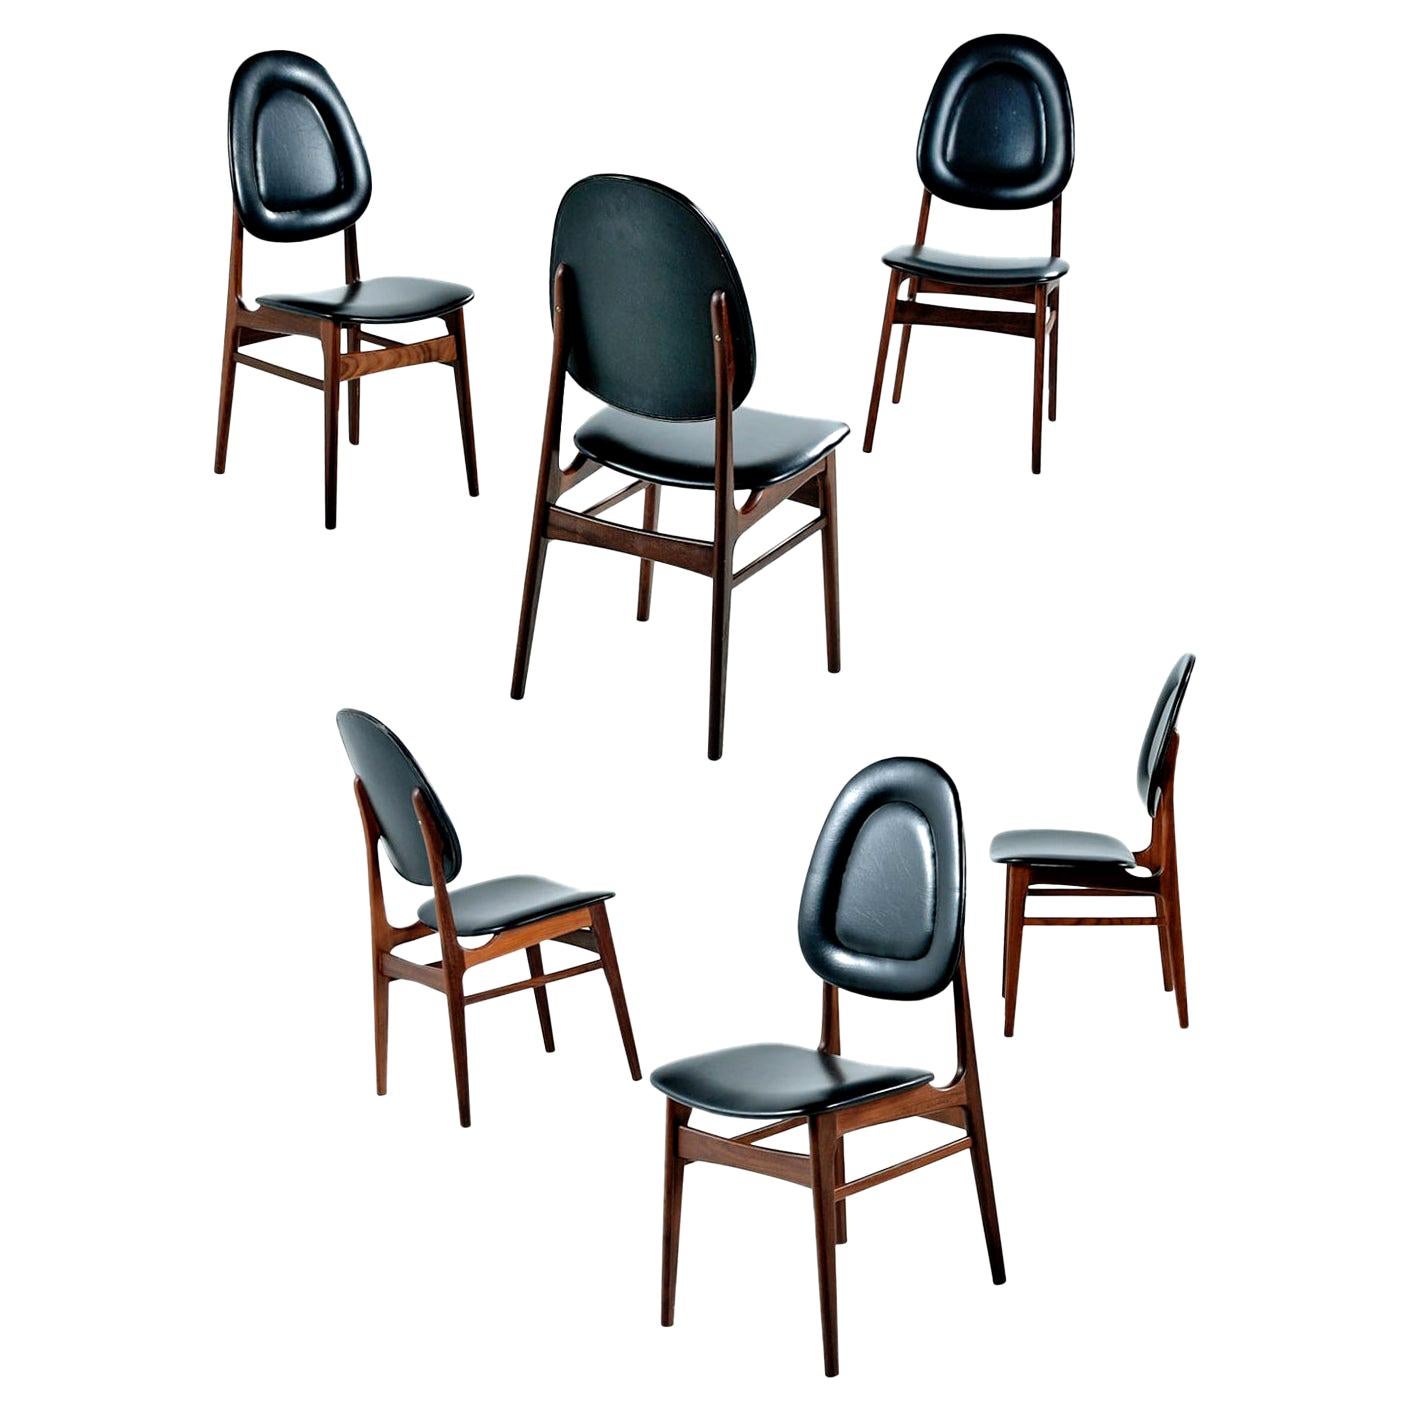 These solid walnut dining chairs by Sørheim are a beautiful example of Classic Norwegian design. The interesting raised edges on the cushions and high backs provide both comfort and character. Don't let these dainty chairs fool you, the elegant